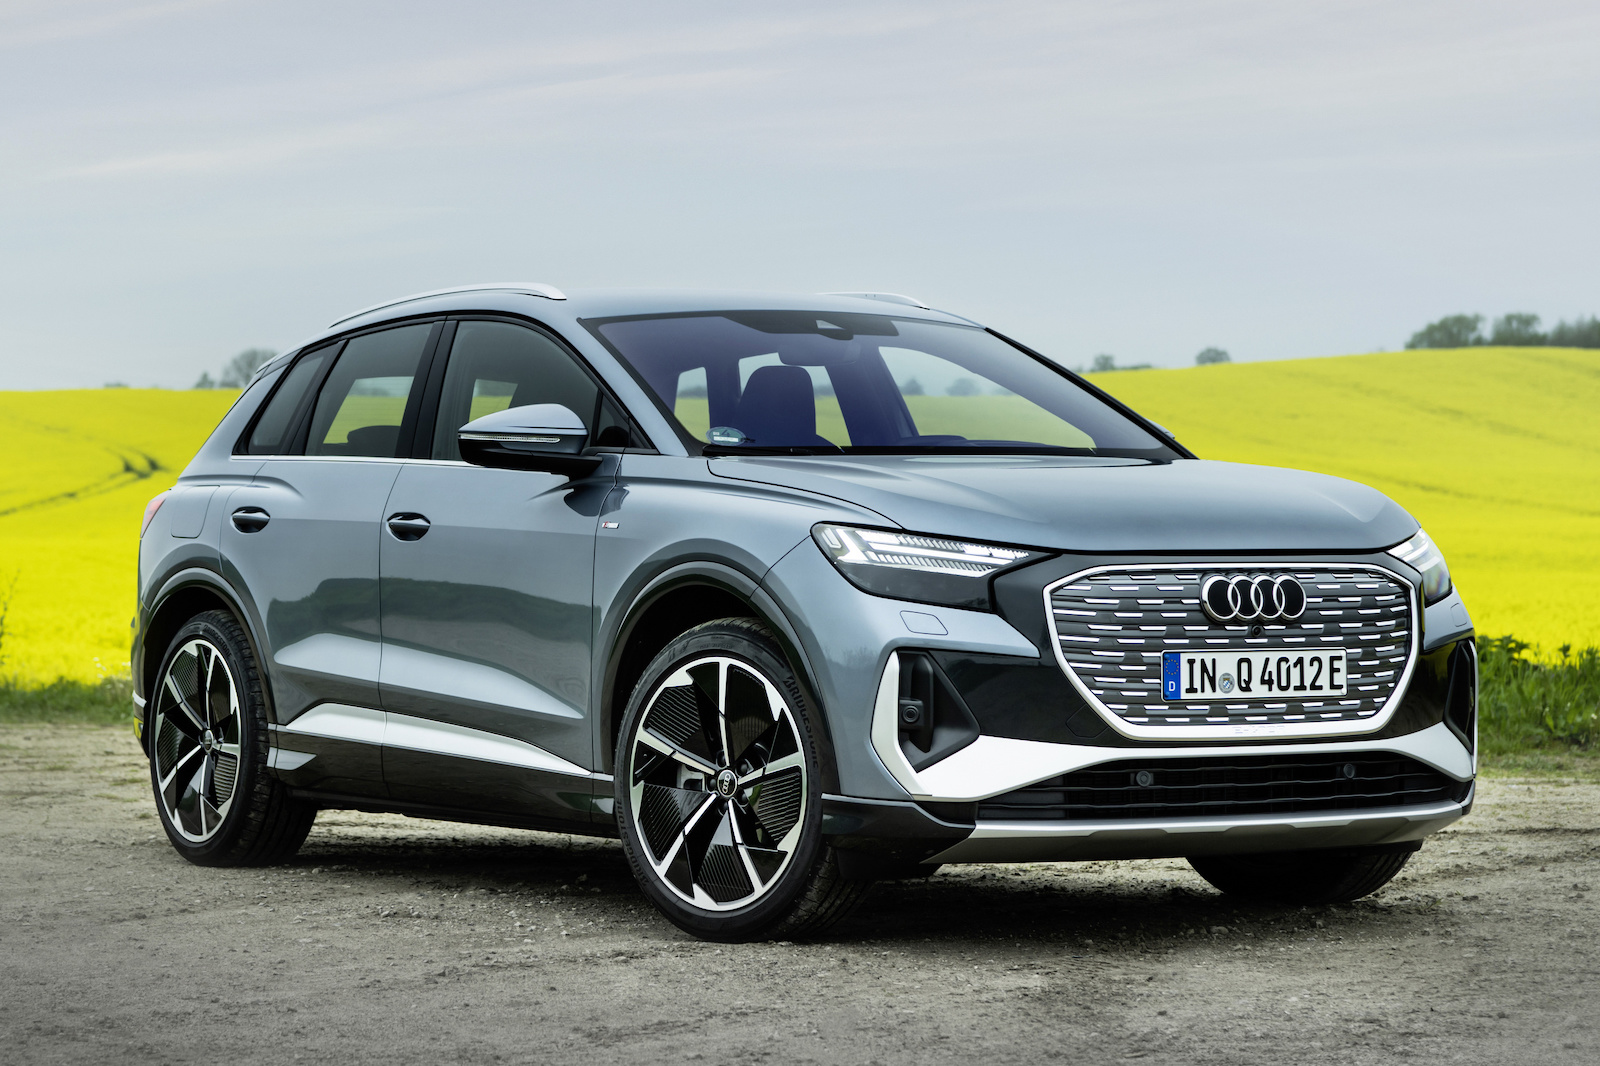 Electric, efficient and emotionally appealing: Audi Q4 e-tron and Q4  Sportback e-tron